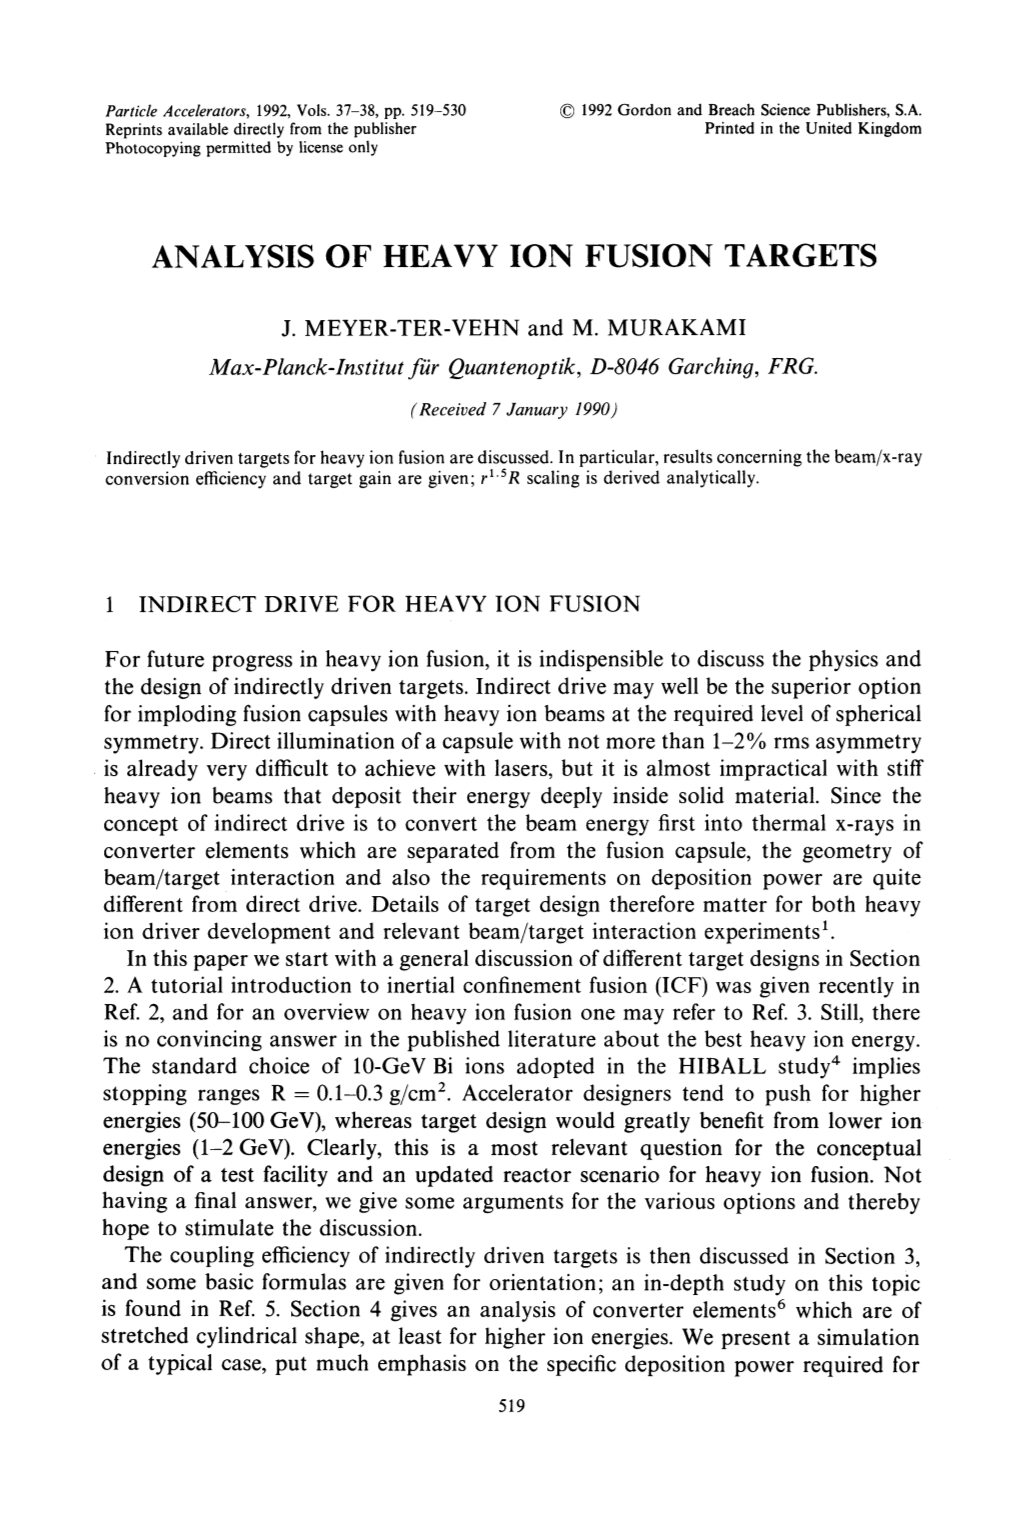 Analysis of Heavy Ion Fusion Targets